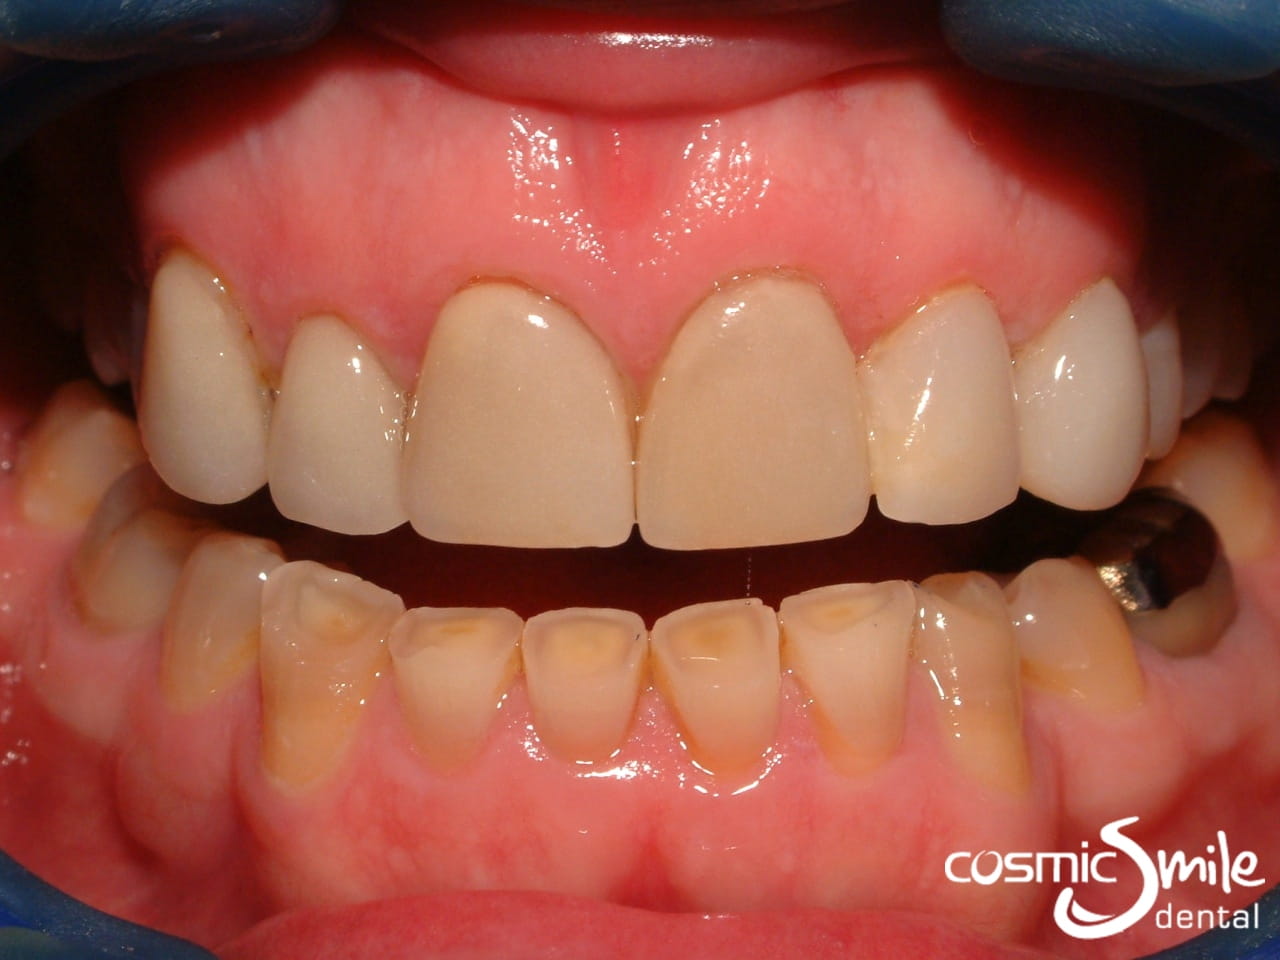 New LUMINEERS on left lateral incisor and canine